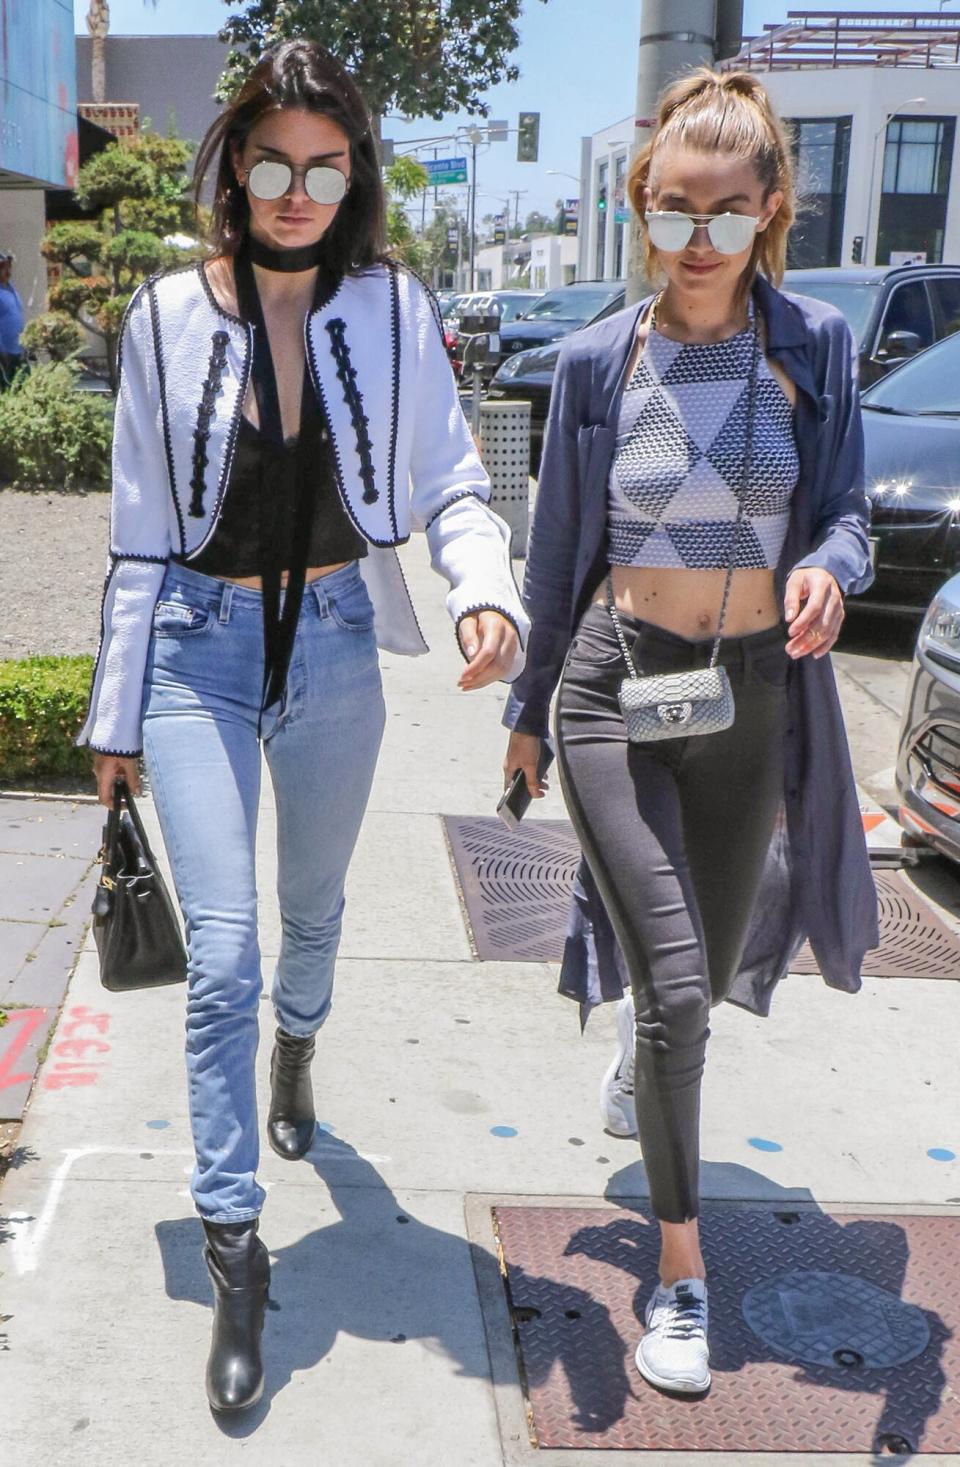 Kendall Jenner and Gigi Hadid are seen in West Hollywood on June 02, 2016 in Los Angeles, California